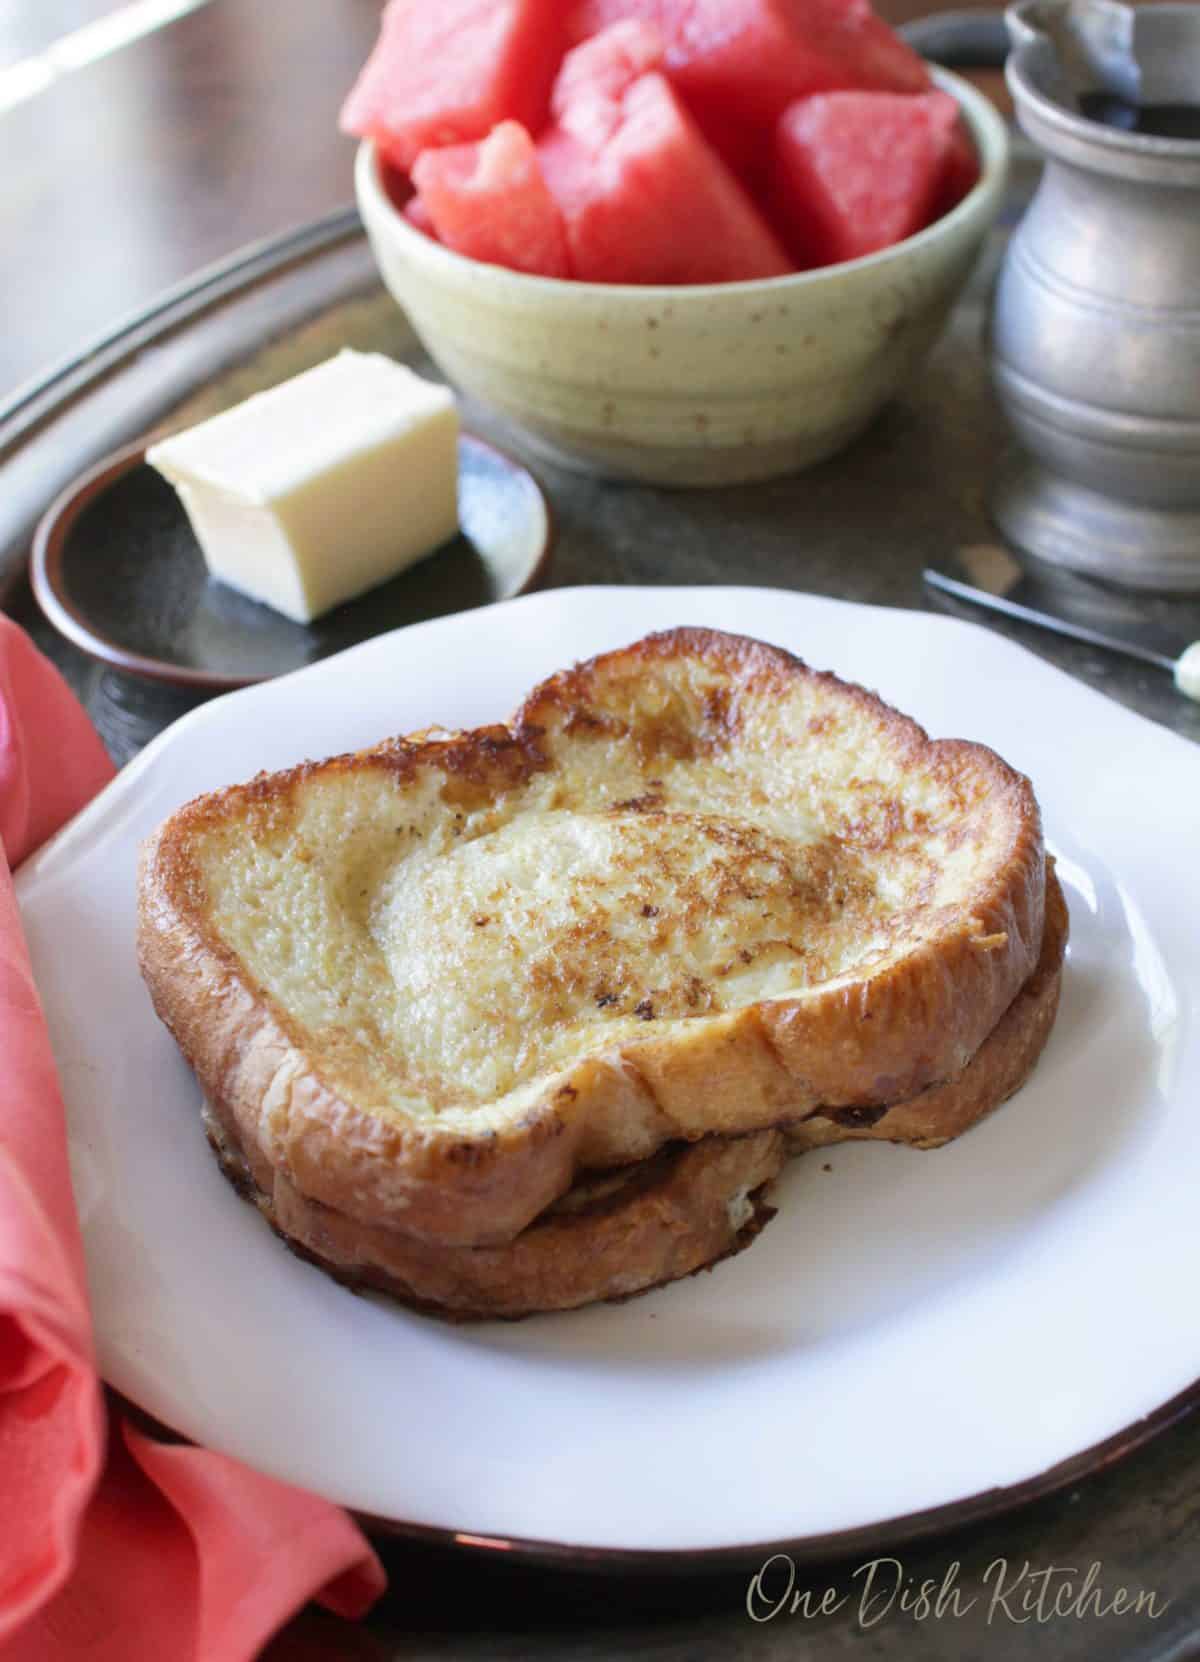 A stack of two french toast slices on a plate next to a stick of butter and a bowl of watermelon slices all on a metal tray